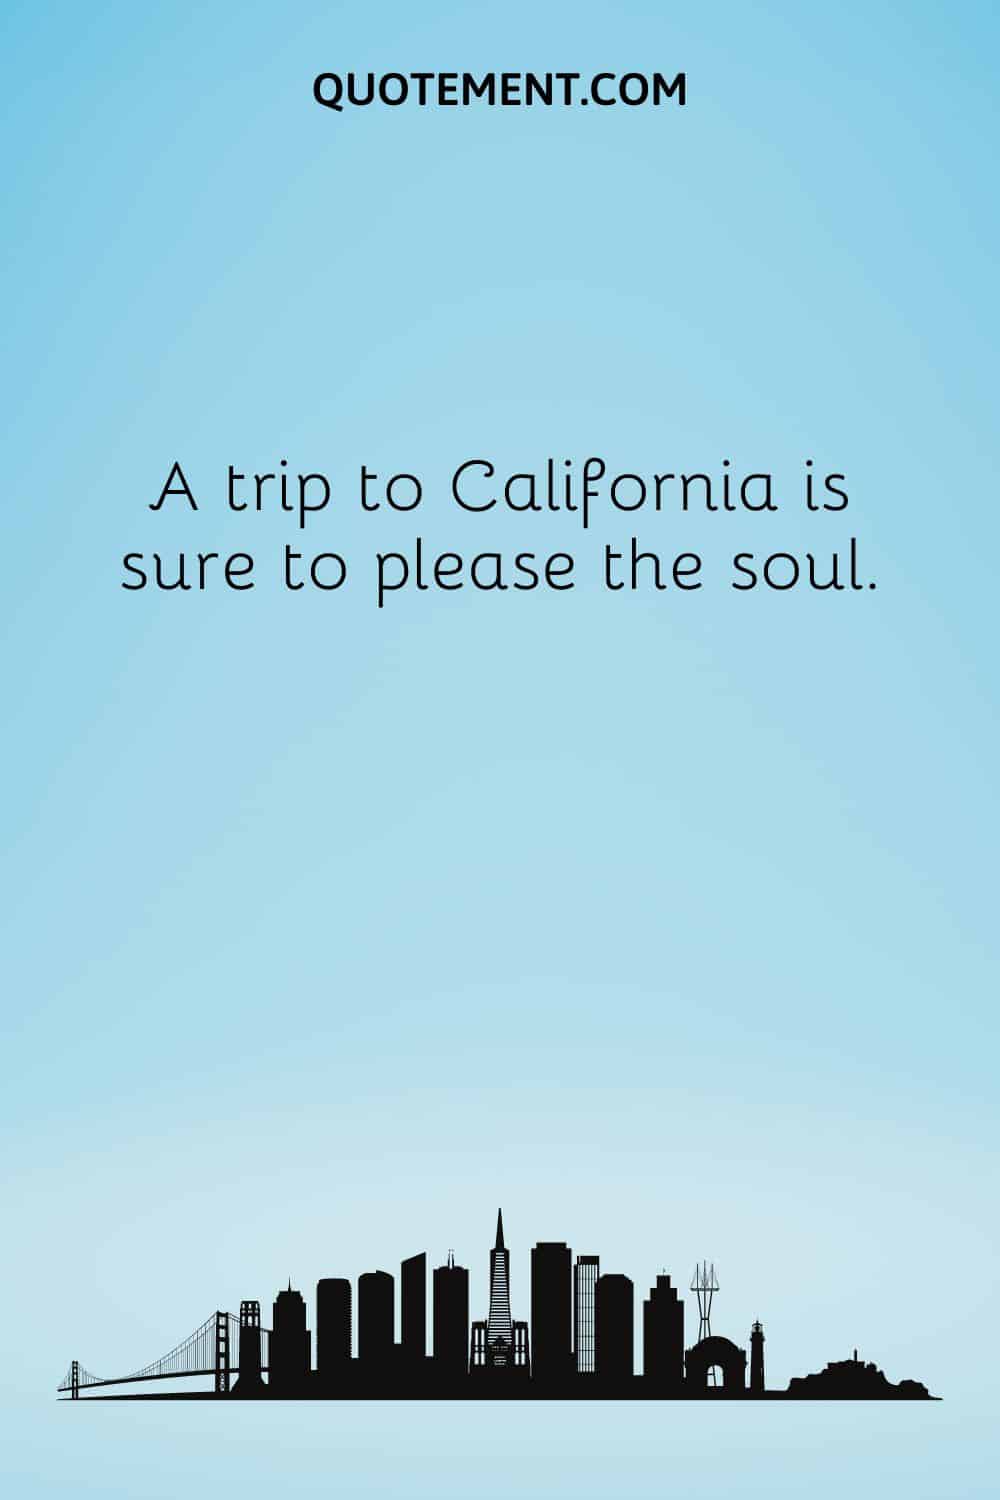  A trip to California is sure to please the soul.
